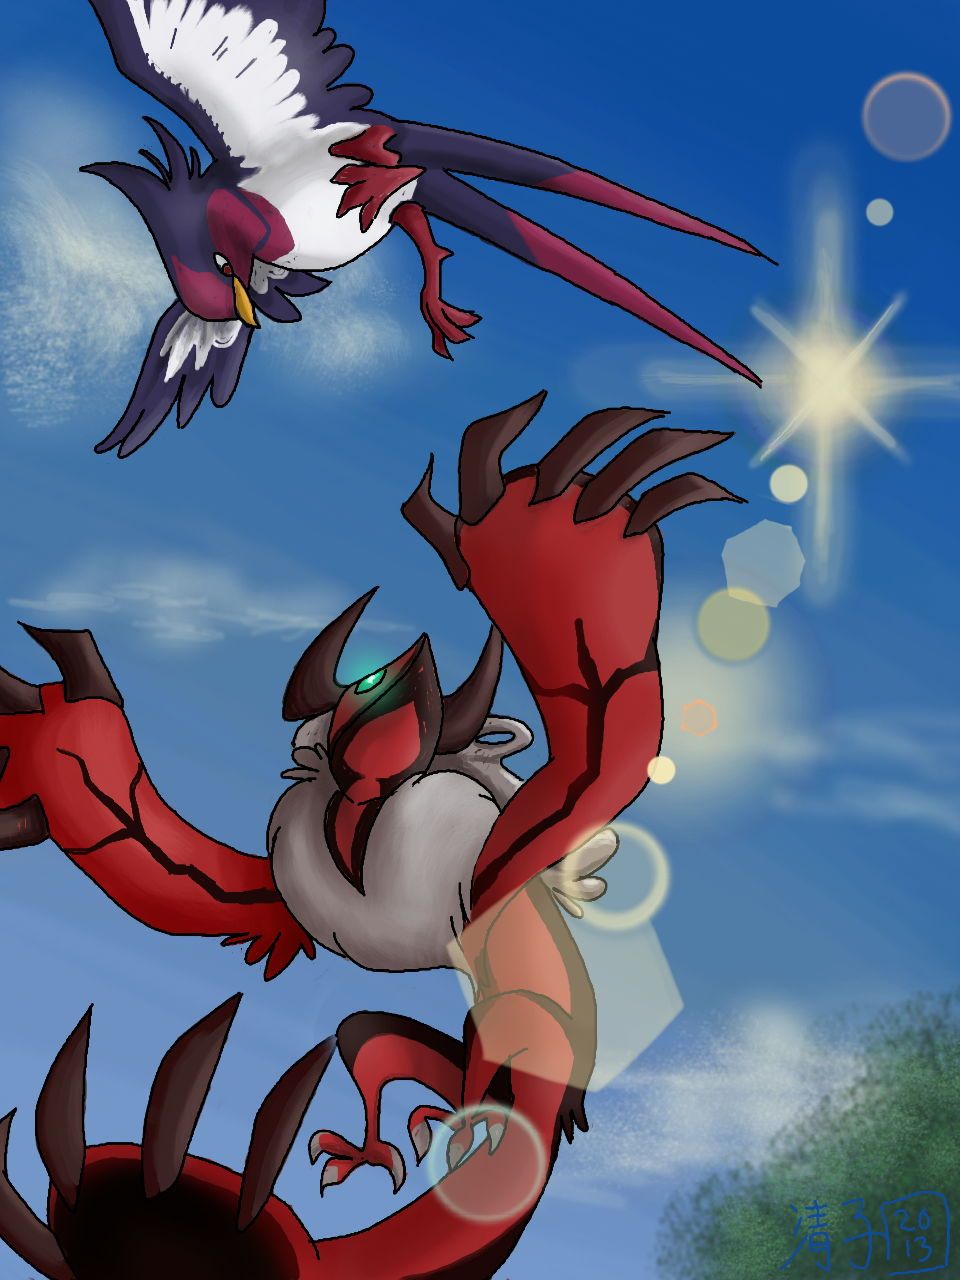 Yveltal and Swellow by kitschsous on DeviantArt